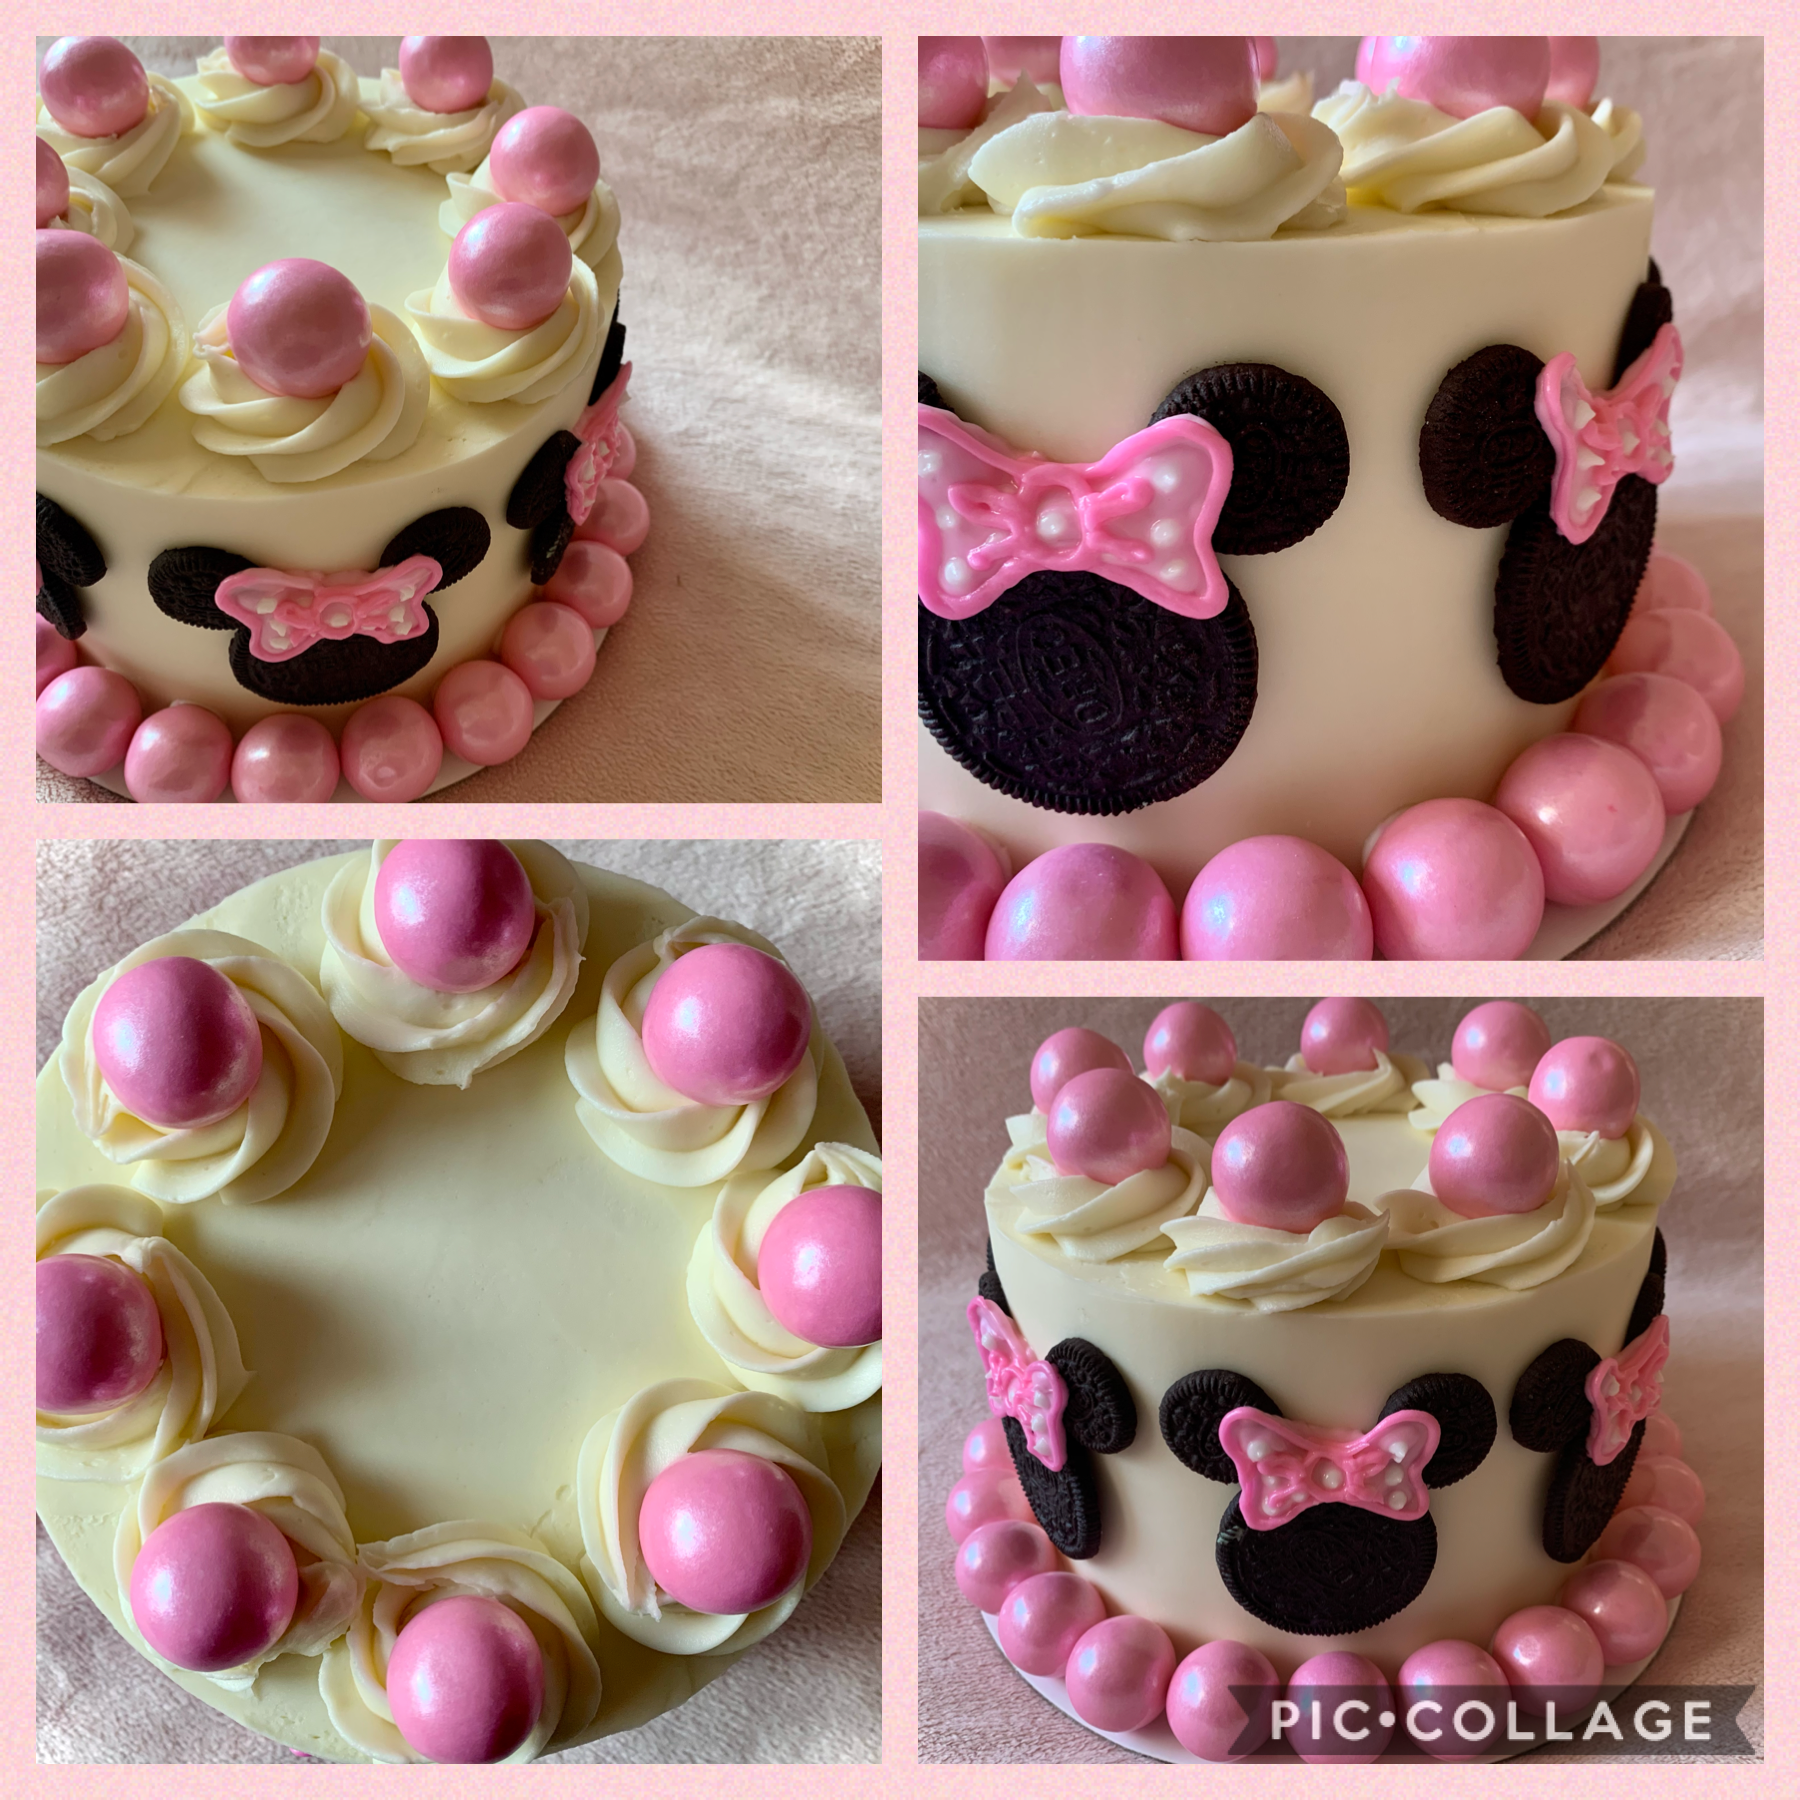 Made a cute little Minnie Mouse cake for someone’s granddaughter today 😊